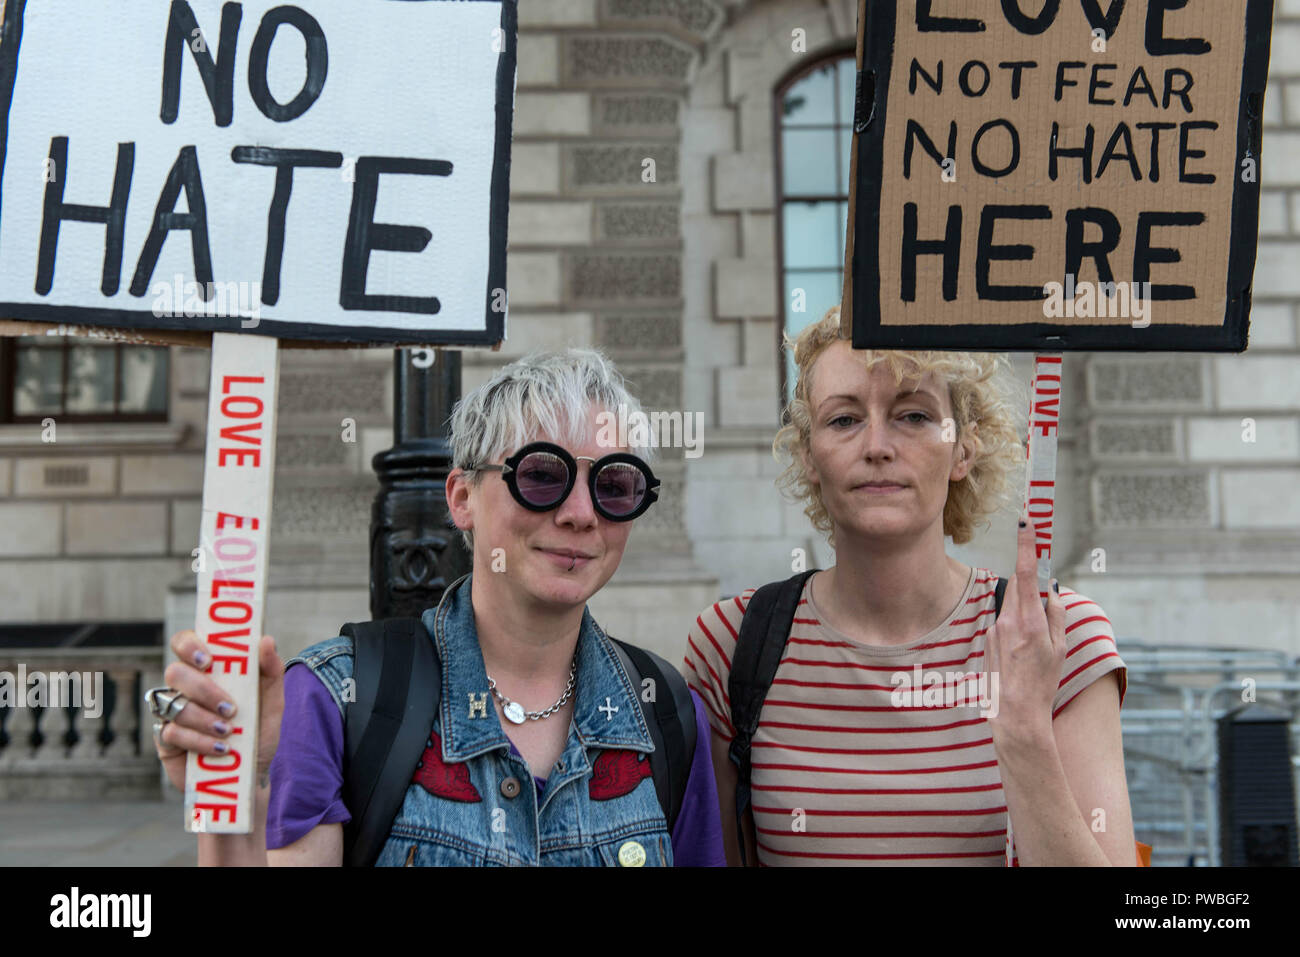 London, Greater London, UK. 13th Oct, 2018. Protesters seen holding placards during the antifascist demonstration against the DFLA in London.Counter demonstration organised by United Against Racism & Islamophobia, Trade Unions and Stand Up to Racism marched from Old Palace Yard to Whitehall in an attempt to block the route of Democratic Football Lads Alliance (DFLA) march in London. During the counter demonstration there were incidents where DFLA supporters attempted to get close to the anti-racist protesters, that were controlled by the police. (Credit Image: © Andres Pantoja Stock Photo